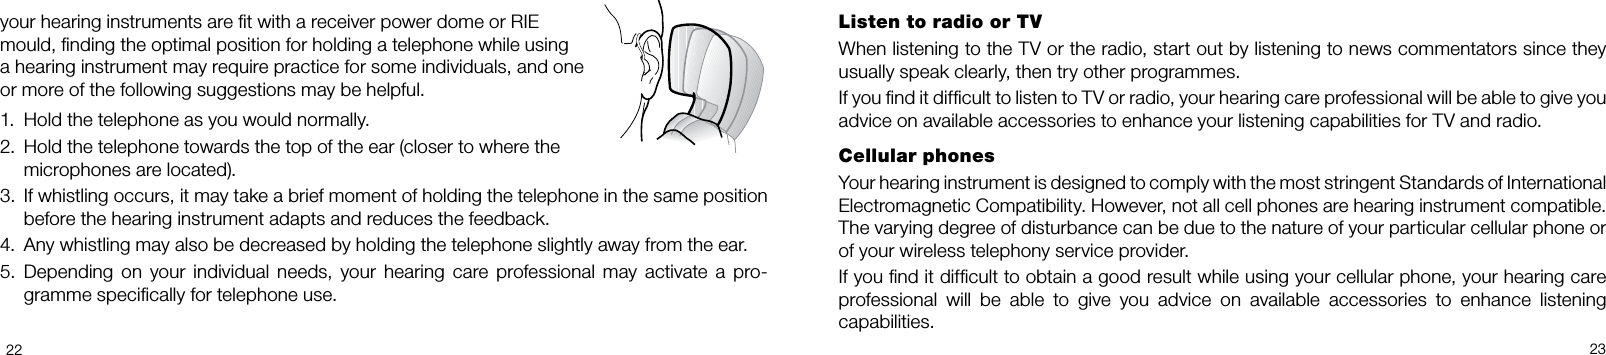 2223Listen to radio or TVWhen listening to the TV or the radio, start out by listening to news commentators since they usually speak clearly, then try other programmes.If you nd it difcult to listen to TV or radio, your hearing care professional will be able to give you advice on available accessories to enhance your listening capabilities for TV and radio.Cellular phonesYour hearing instrument is designed to comply with the most stringent Standards of International  Electromagnetic Compatibility. However, not all cell phones are hearing instrument compatible. The varying degree of disturbance can be due to the nature of your particular cellular phone or of your wireless telephony service provider.If you nd it difcult to obtain a good result while using your cellular phone, your hearing care professional  will  be  able  to  give  you  advice  on  available  accessories  to  enhance  listening  capabilities.your hearing instruments are t with a receiver power dome or RIE mould, nding the optimal position for holding a telephone while using a hearing instrument may require practice for some individuals, and one or more of the following suggestions may be helpful.1.  Hold the telephone as you would normally.2.  Hold the telephone towards the top of the ear (closer to where the   microphones are located).3.  If whistling occurs, it may take a brief moment of holding the telephone in the same position before the hearing instrument adapts and reduces the feedback.4.  Any whistling may also be decreased by holding the telephone slightly away from the ear.5.  Depending  on  your  individual  needs,  your  hearing  care  professional  may  activate  a  pro-gramme specically for telephone use.